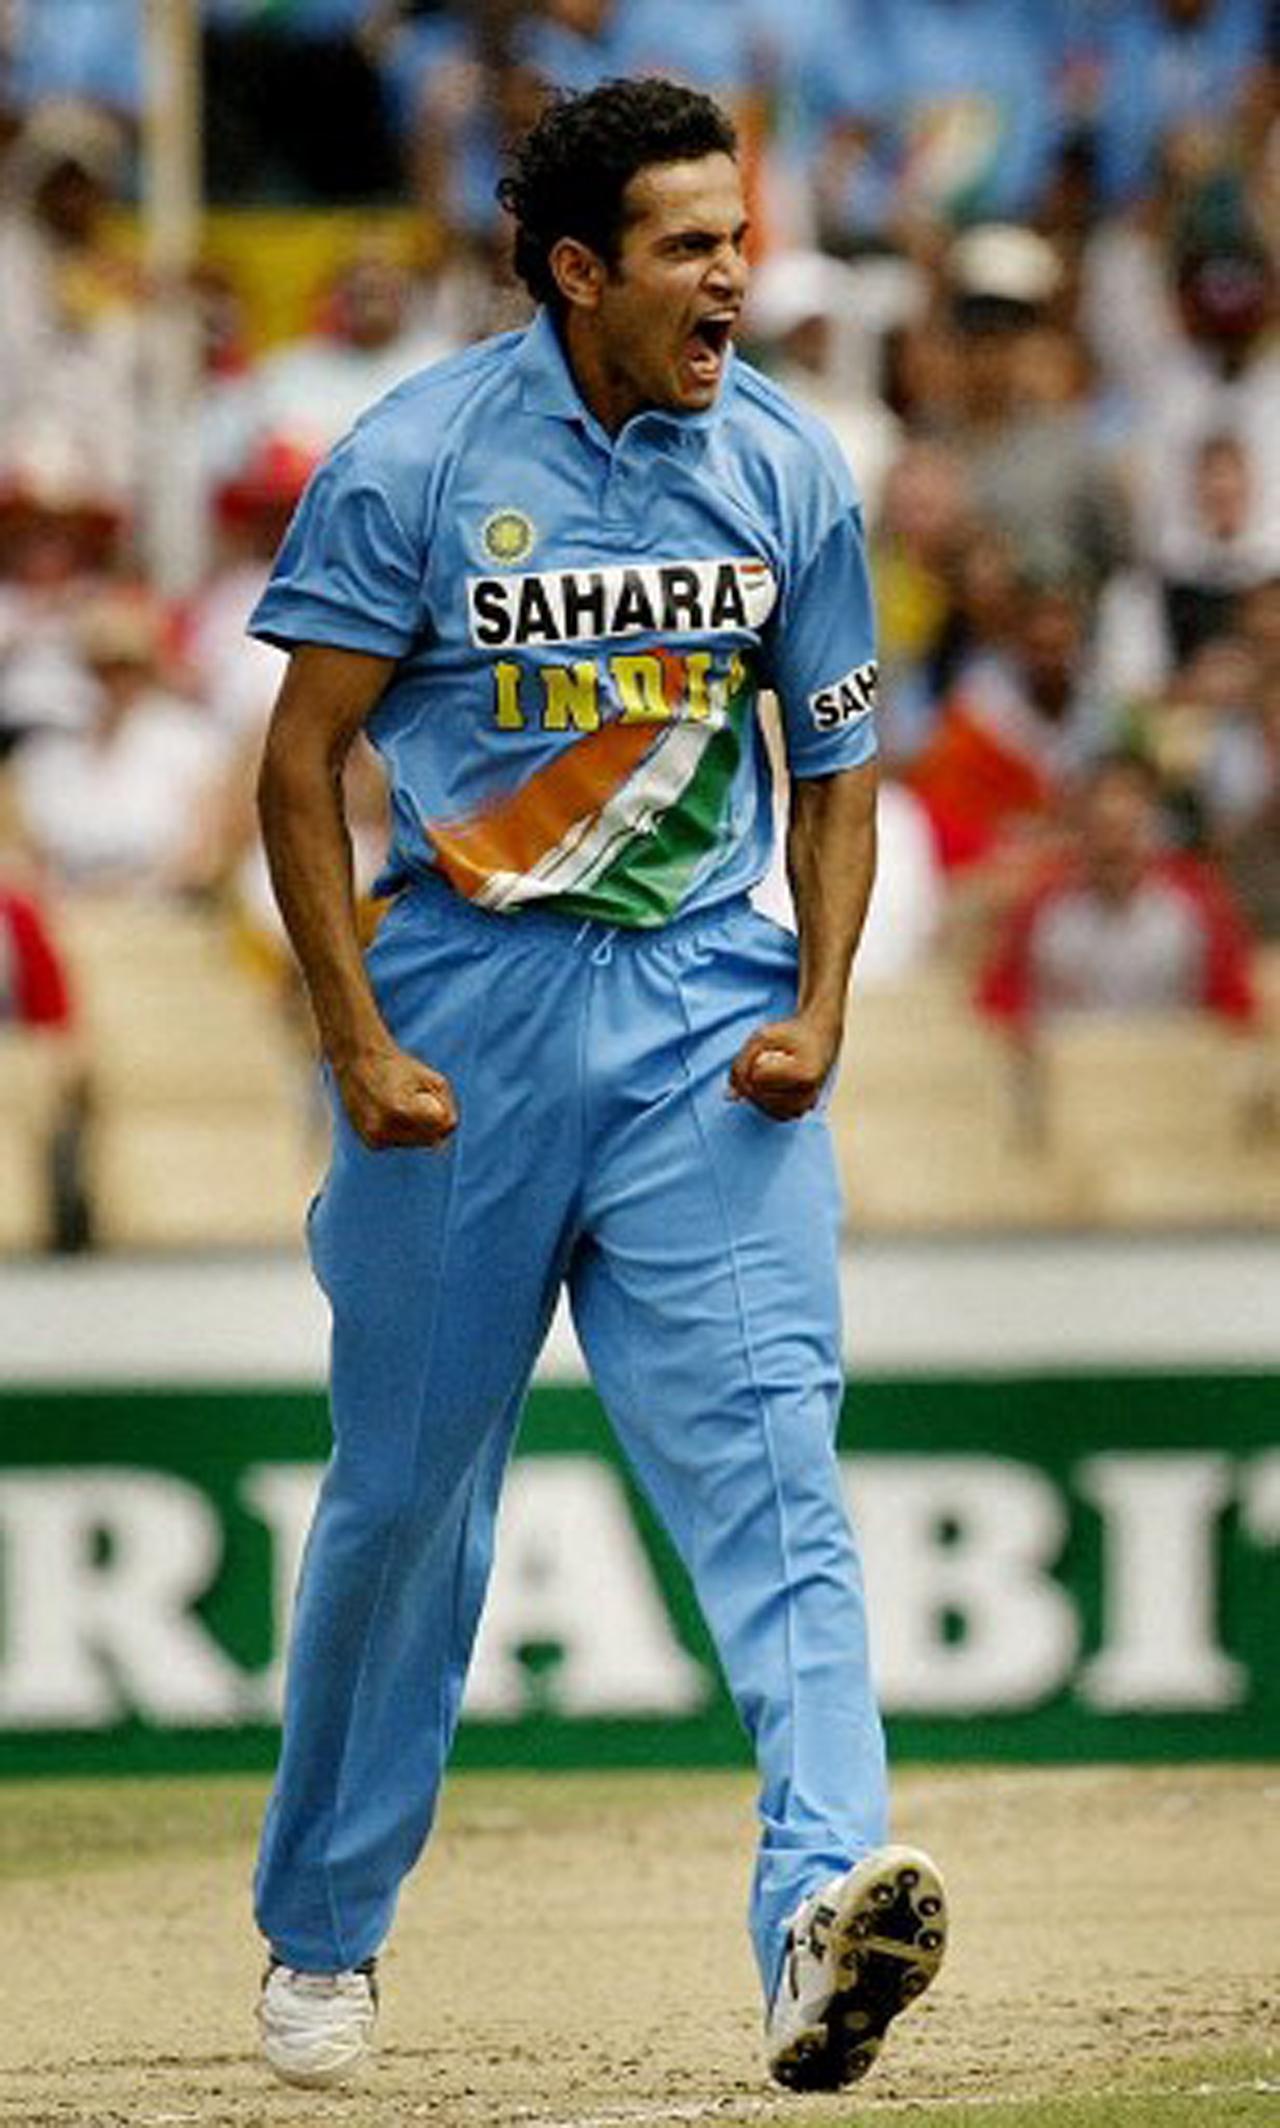 Irfan Pathan is known as one of the finest and most impactful bowlers of his generation and his contribution to the game during his career will be cherished